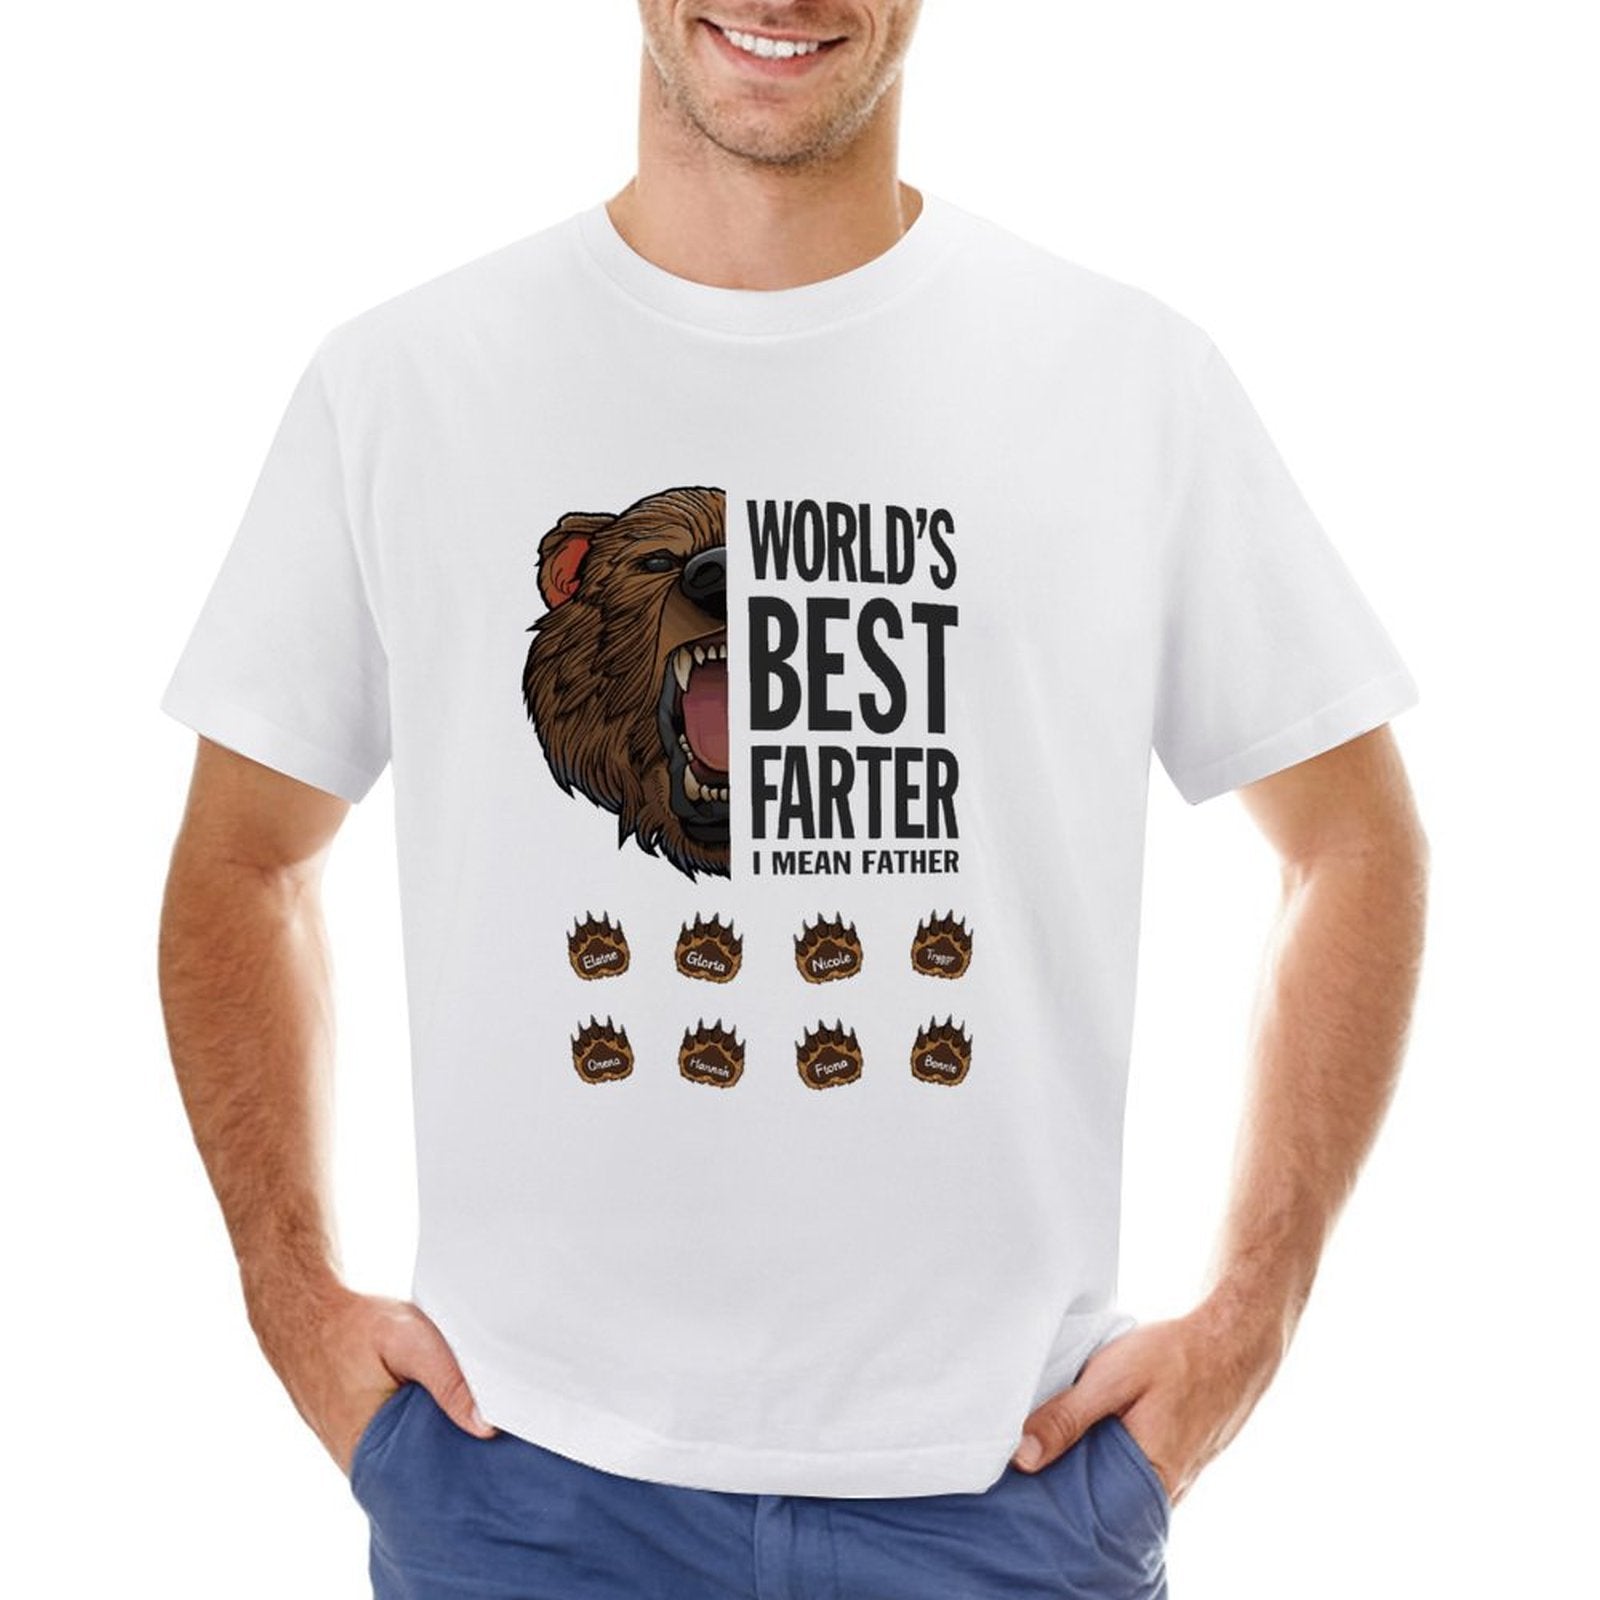 Personalized Dad Bear Shirt , World's Best Father T-Shirt , Custom Shirt with Name , Father's Day Gifts from Kids - colorfulcustom